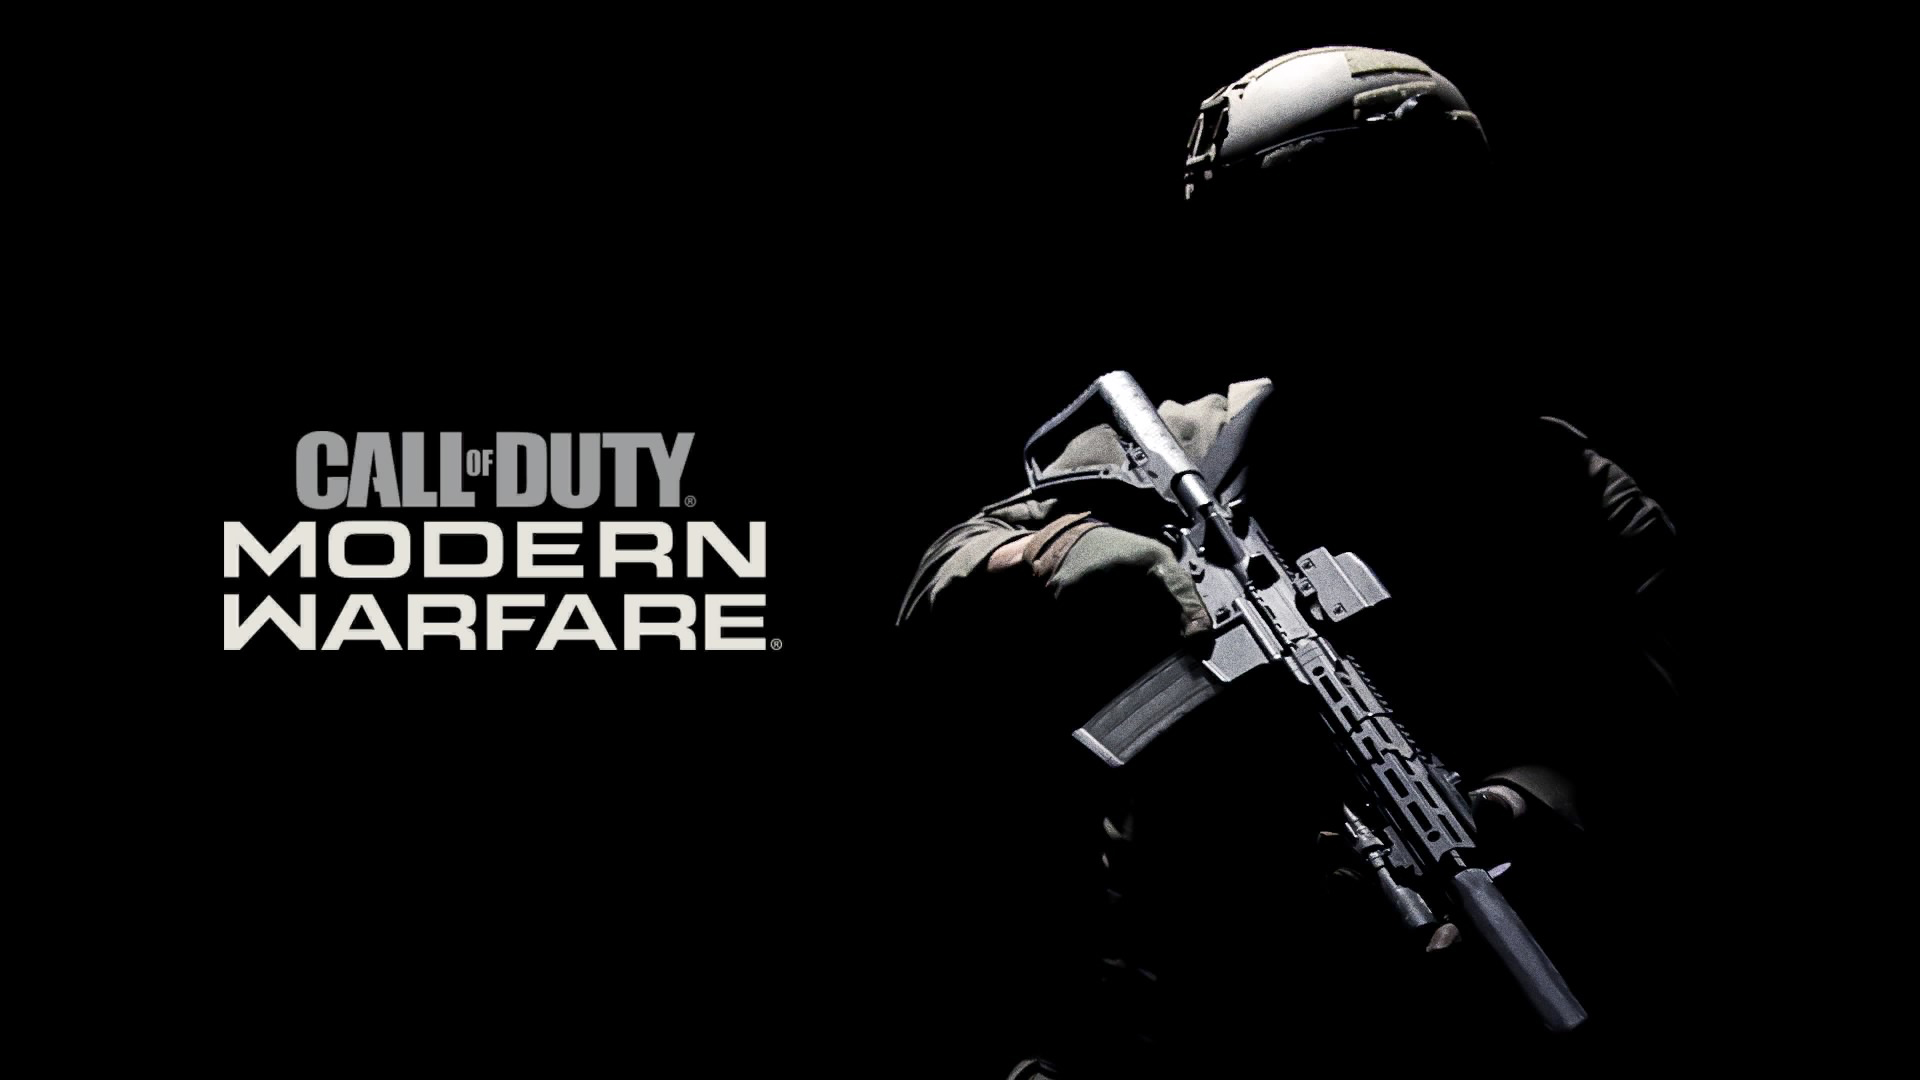 General 1920x1080 Call of Duty: Modern Warfare Call of Duty video games weapon soldier black background Activision Infinity Ward